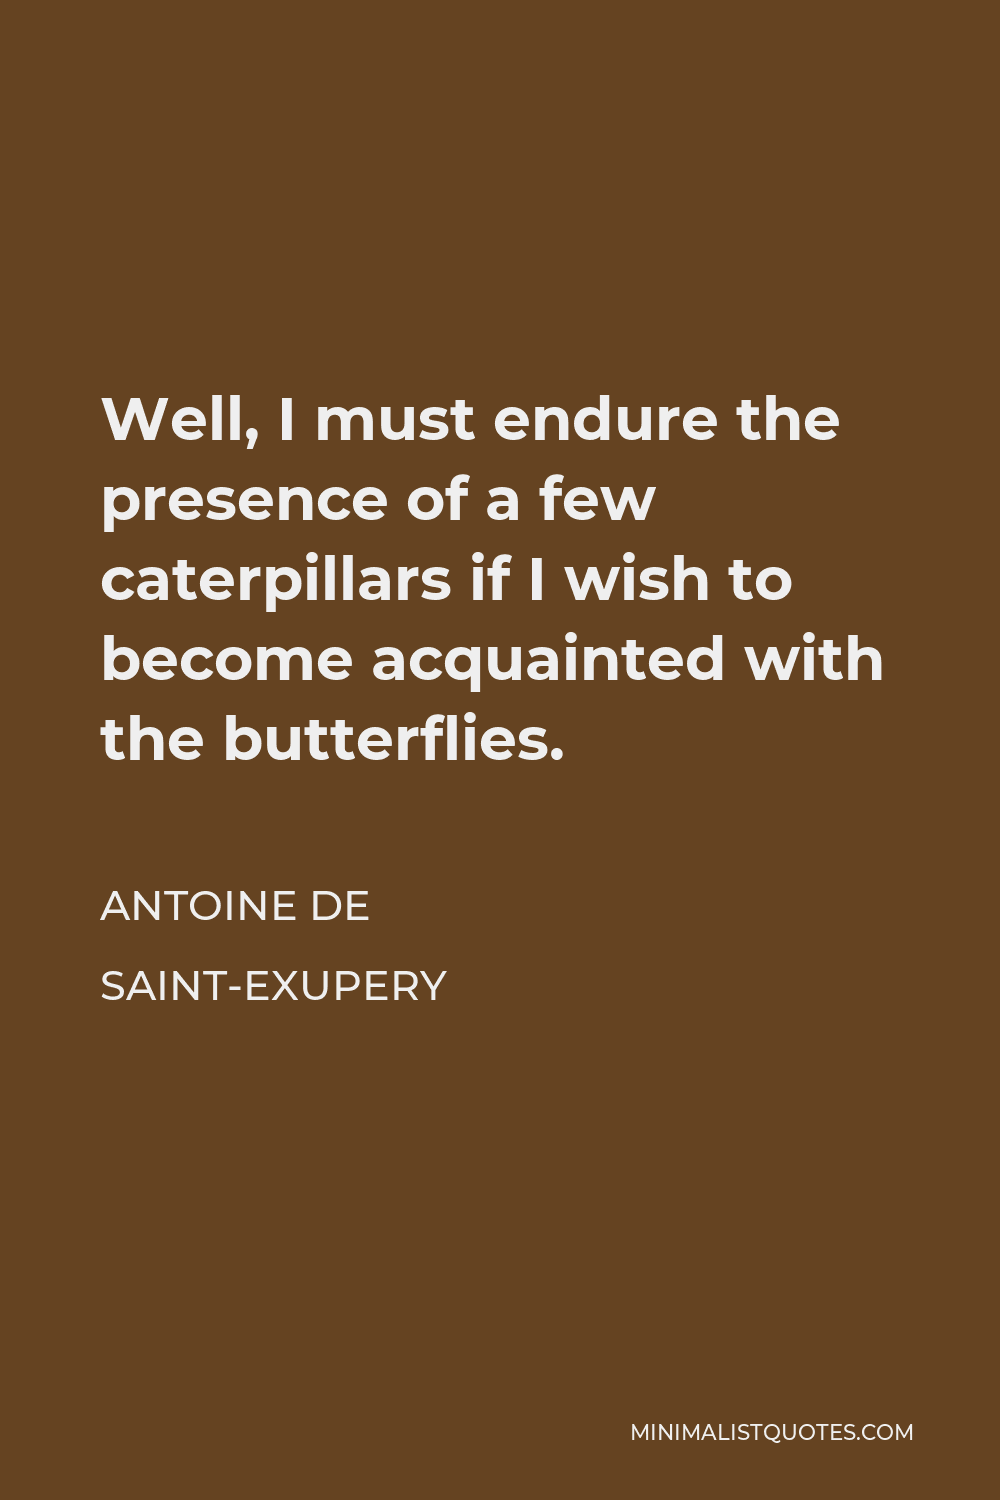 Antoine de Saint-Exupery Quote - Well, I must endure the presence of a few caterpillars if I wish to become acquainted with the butterflies.